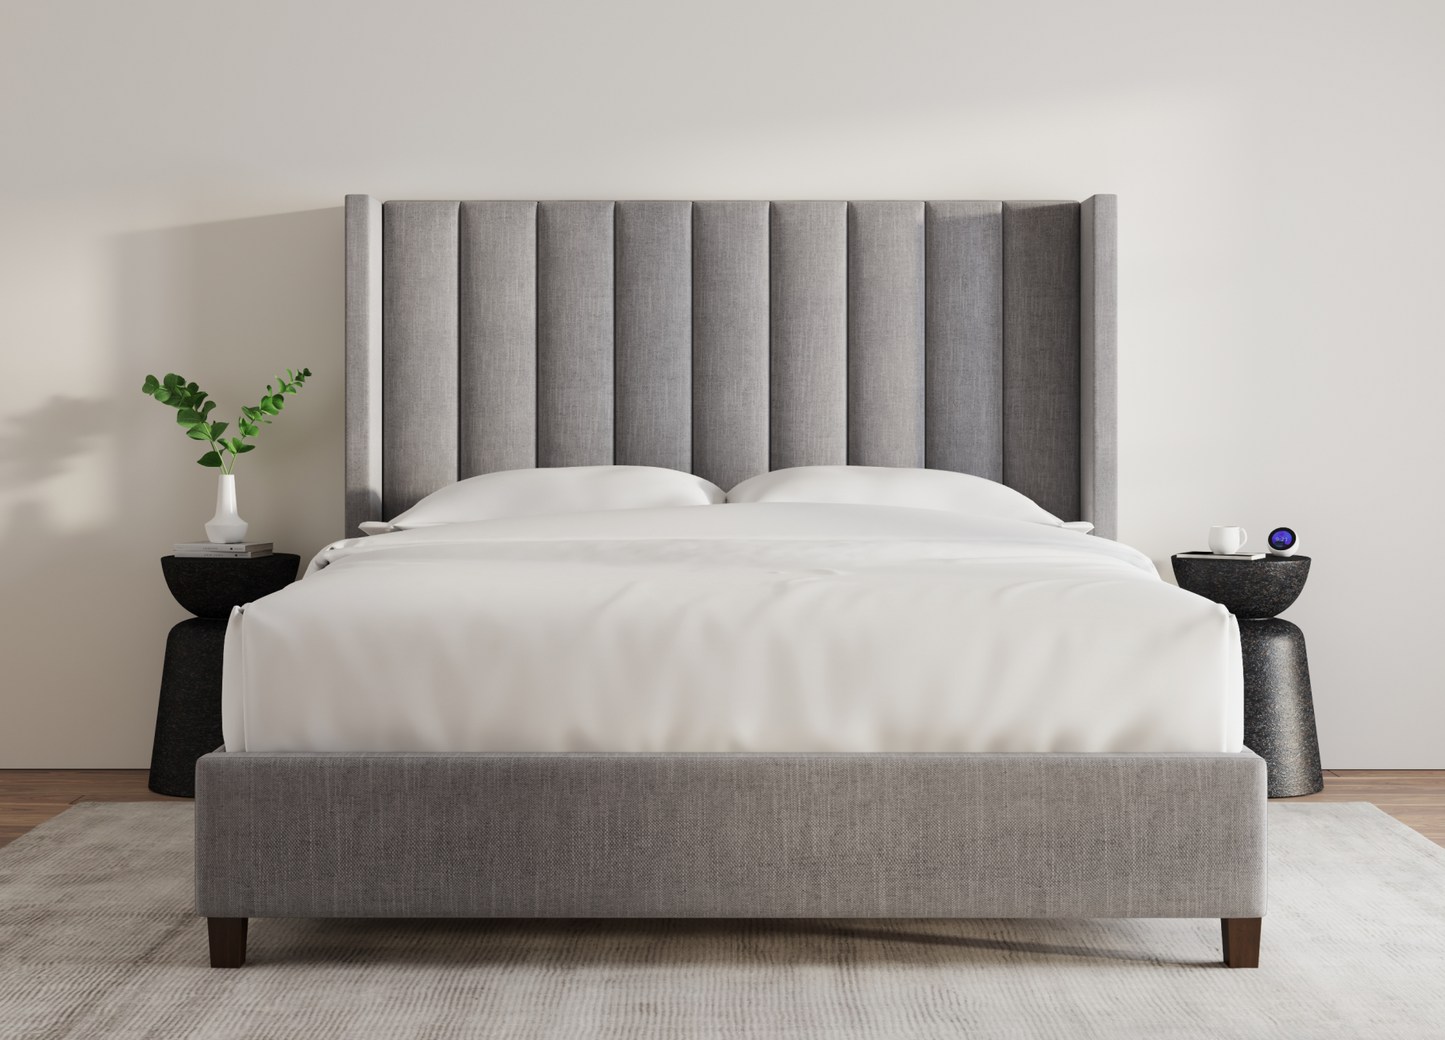 Front view of the Blackwell Bed in stone, highlighting the intricate vertical channel design - Mattress King